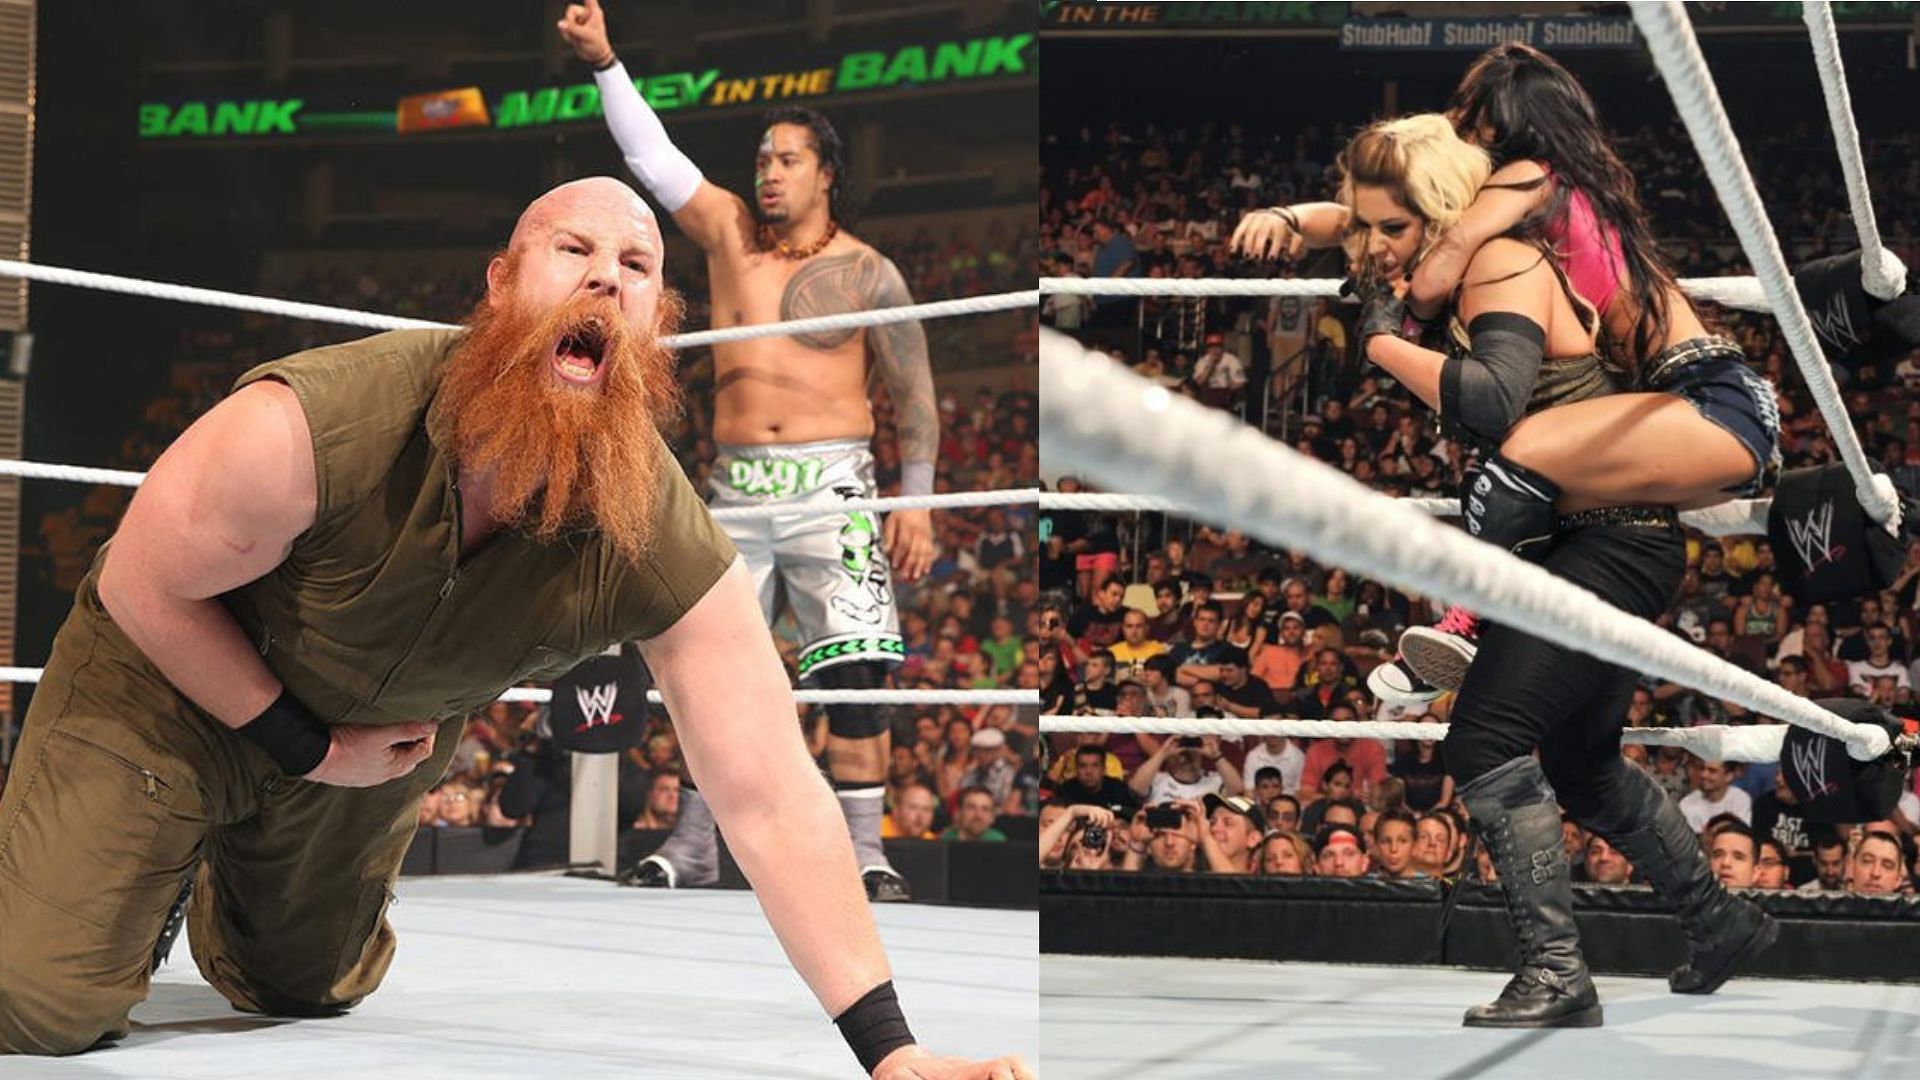 WWE have had numerous matches on their Money in the Bank events that deserve more love